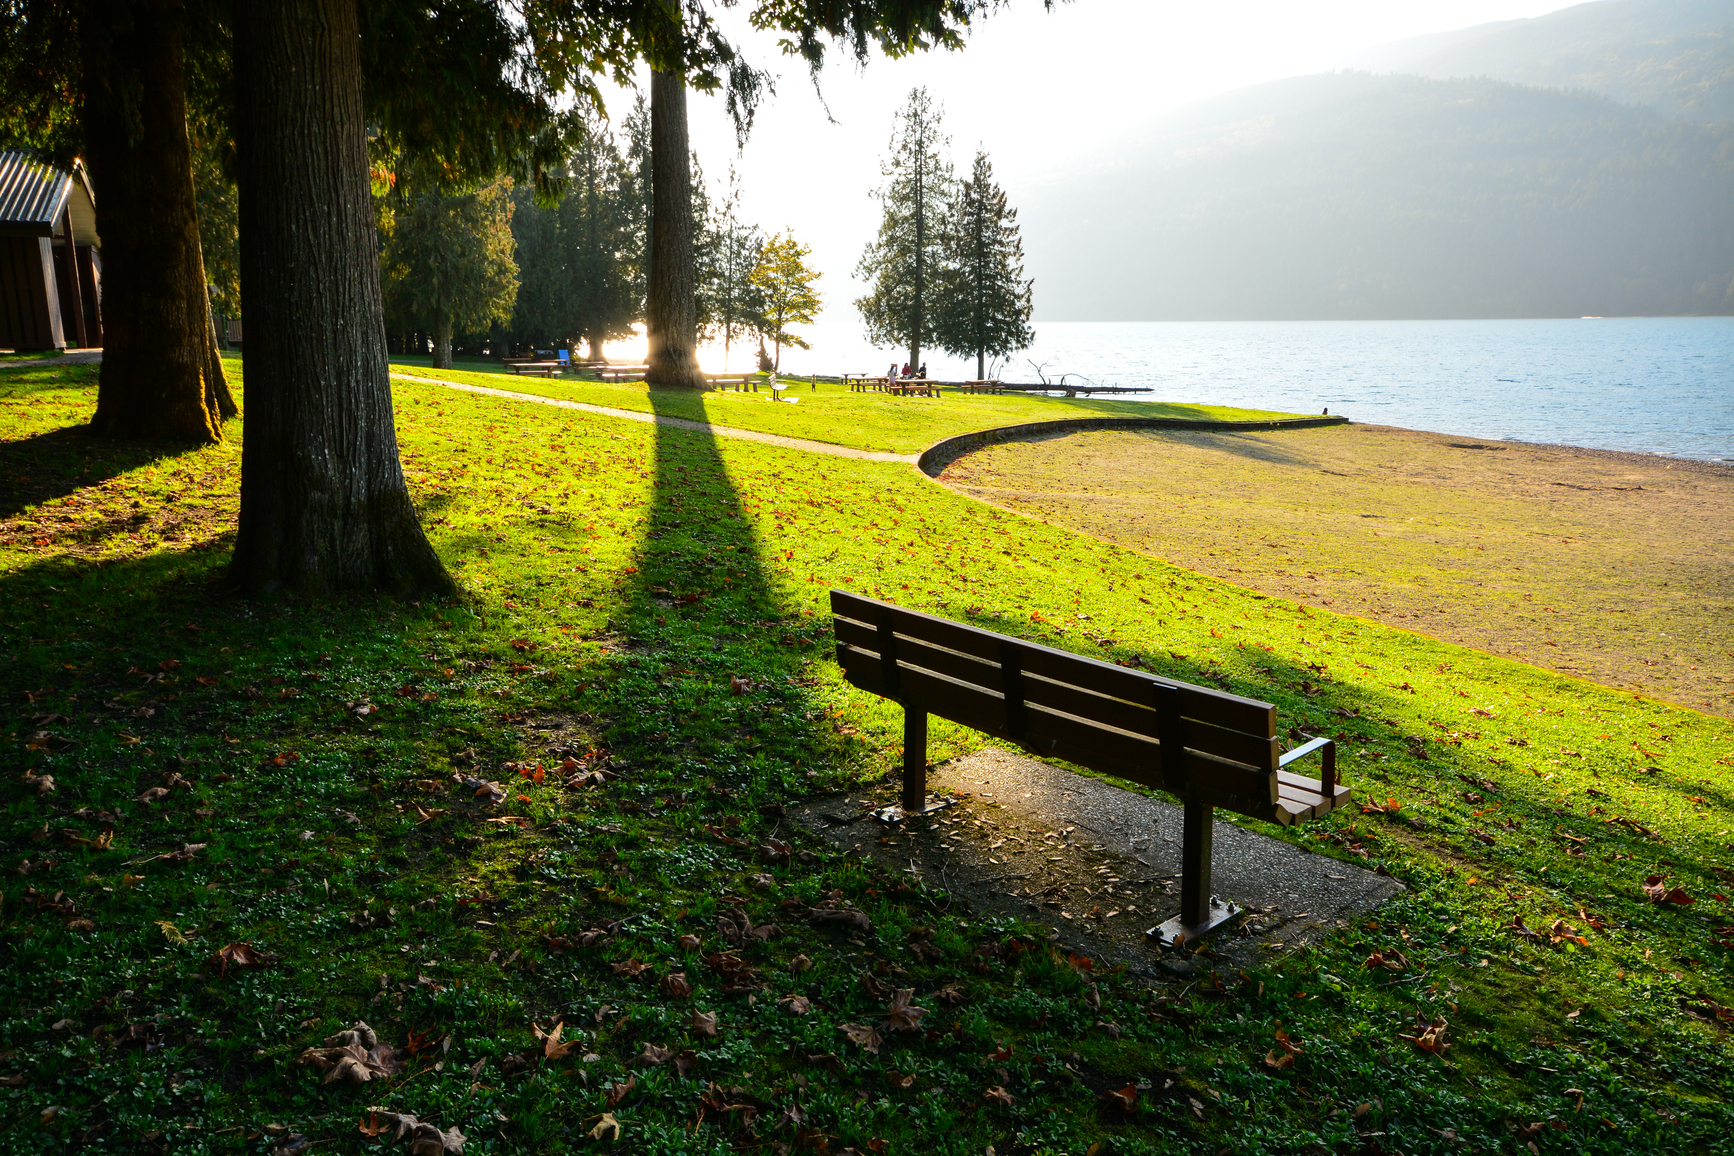 Bench in the shade overlooking the lake